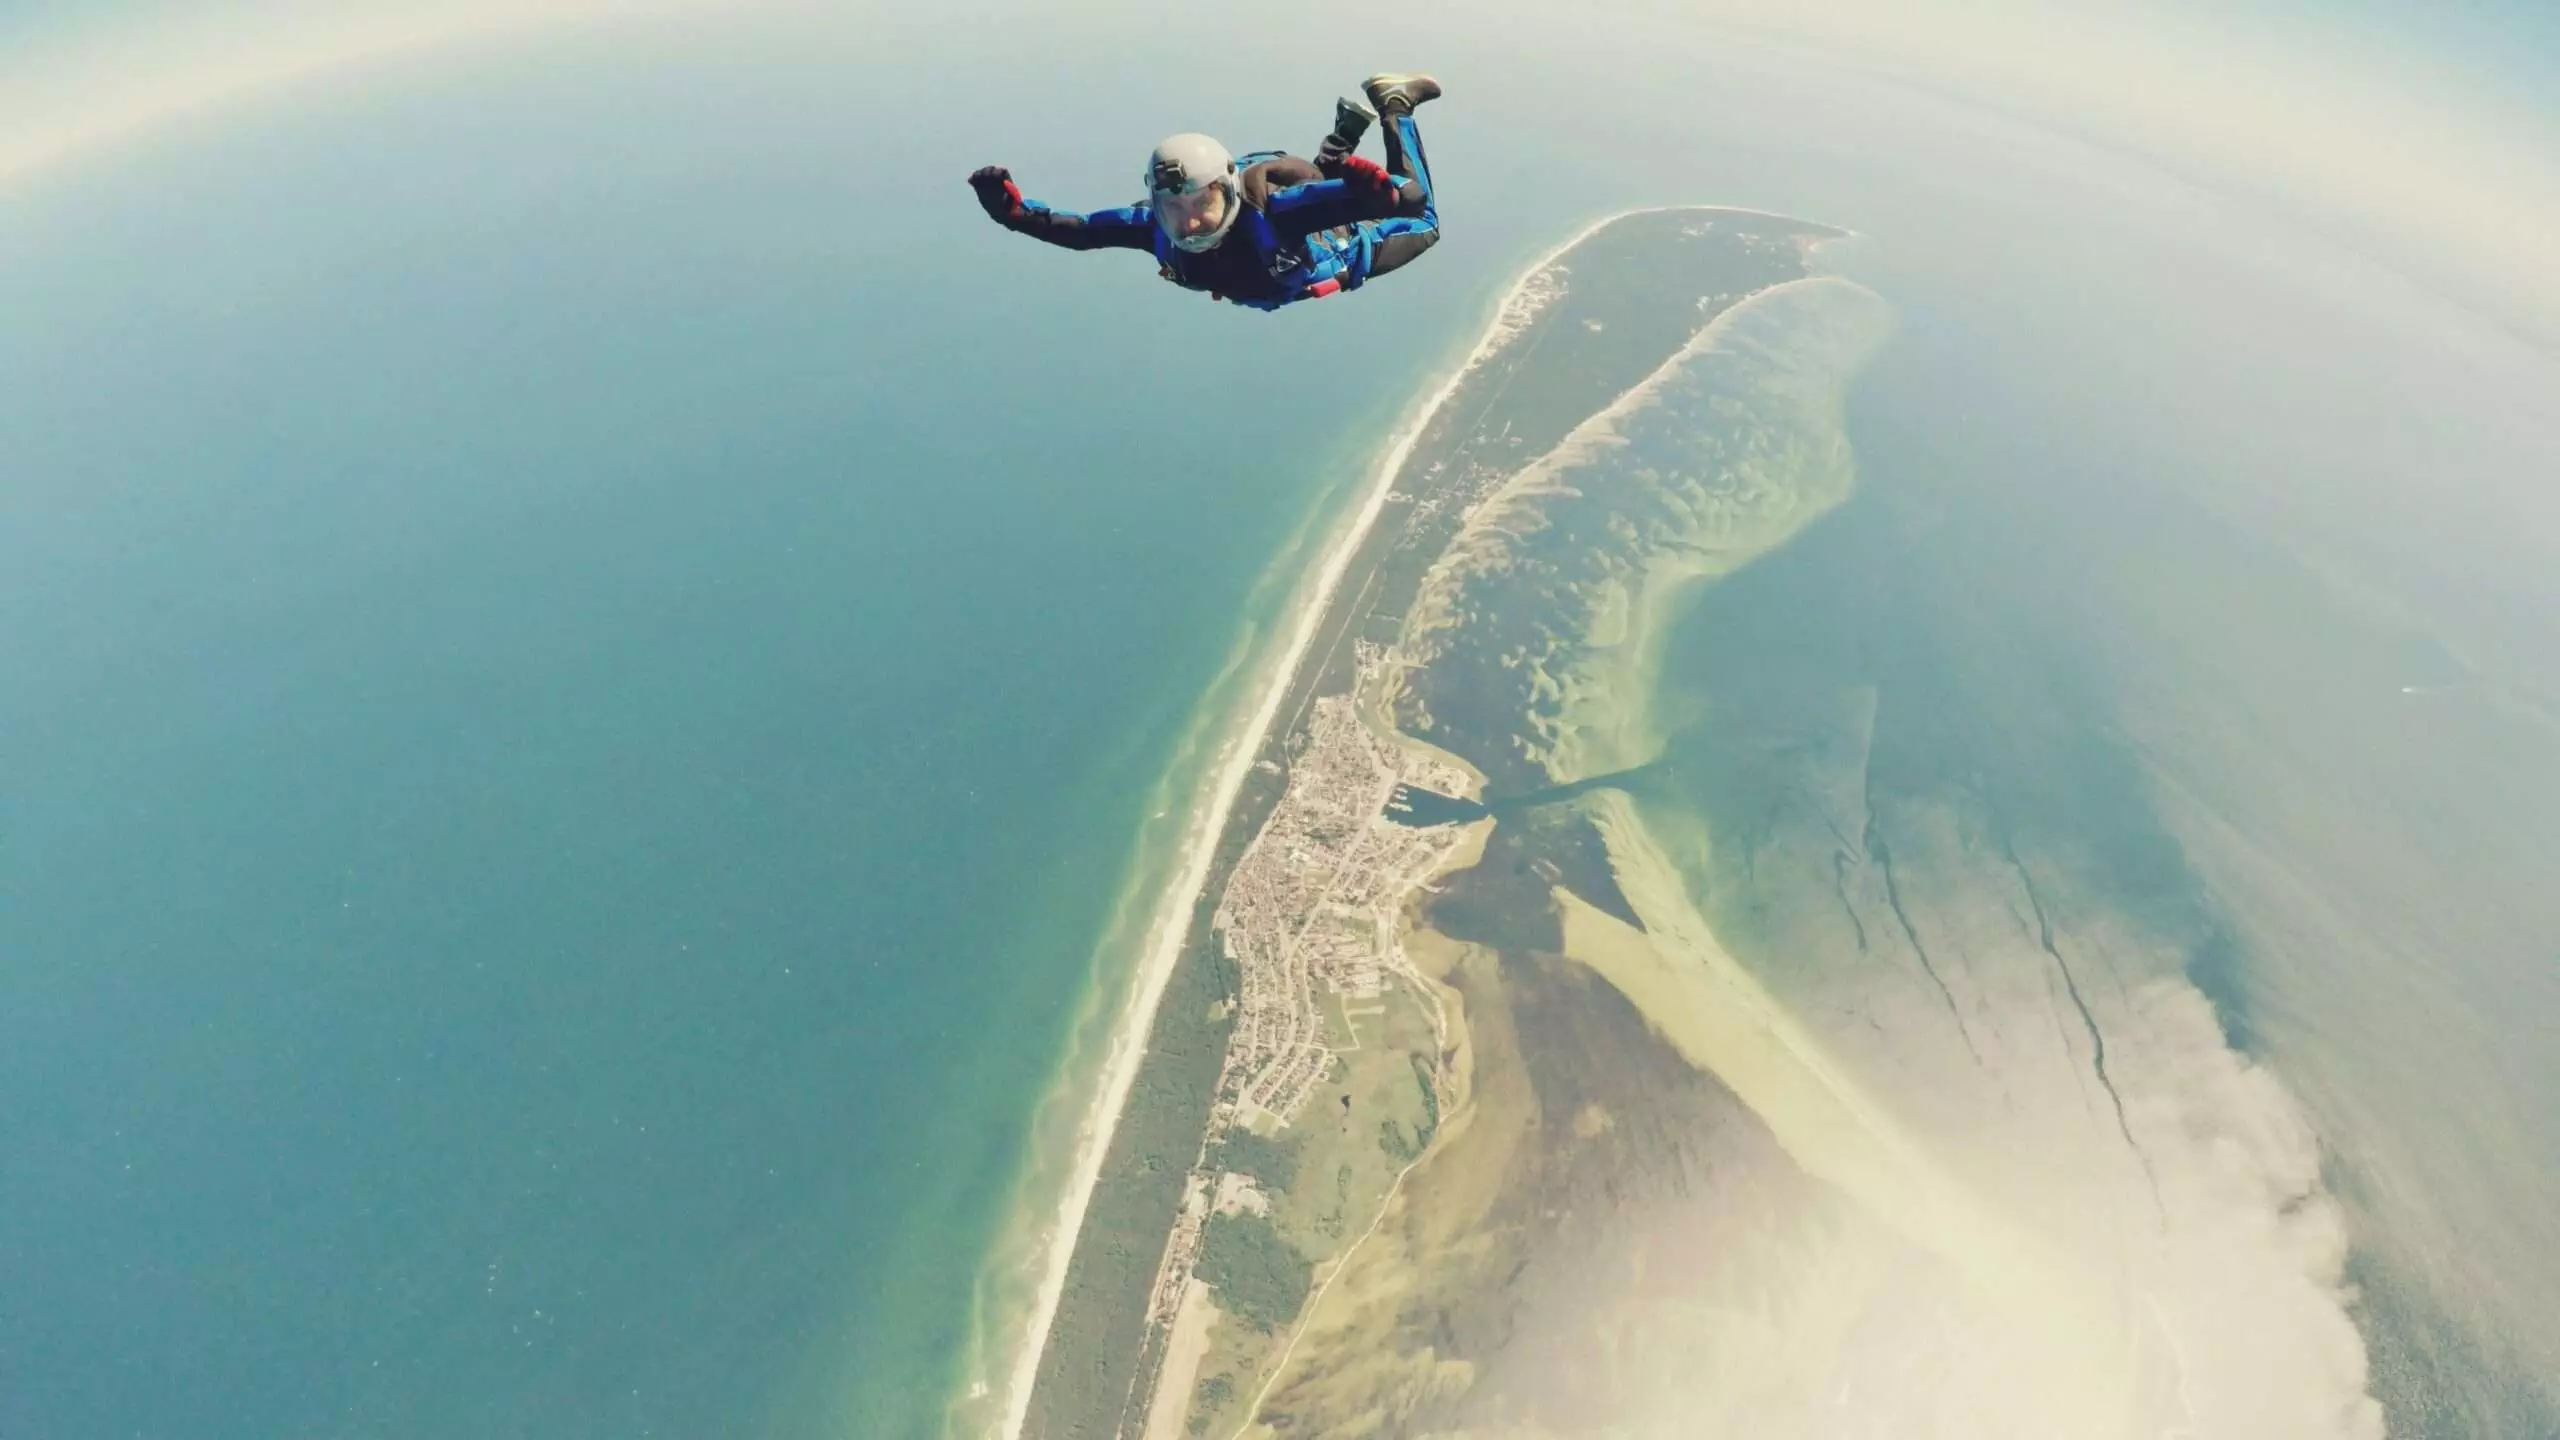 Skydiving in Vancouver? - 5 Things You Should Know! 7